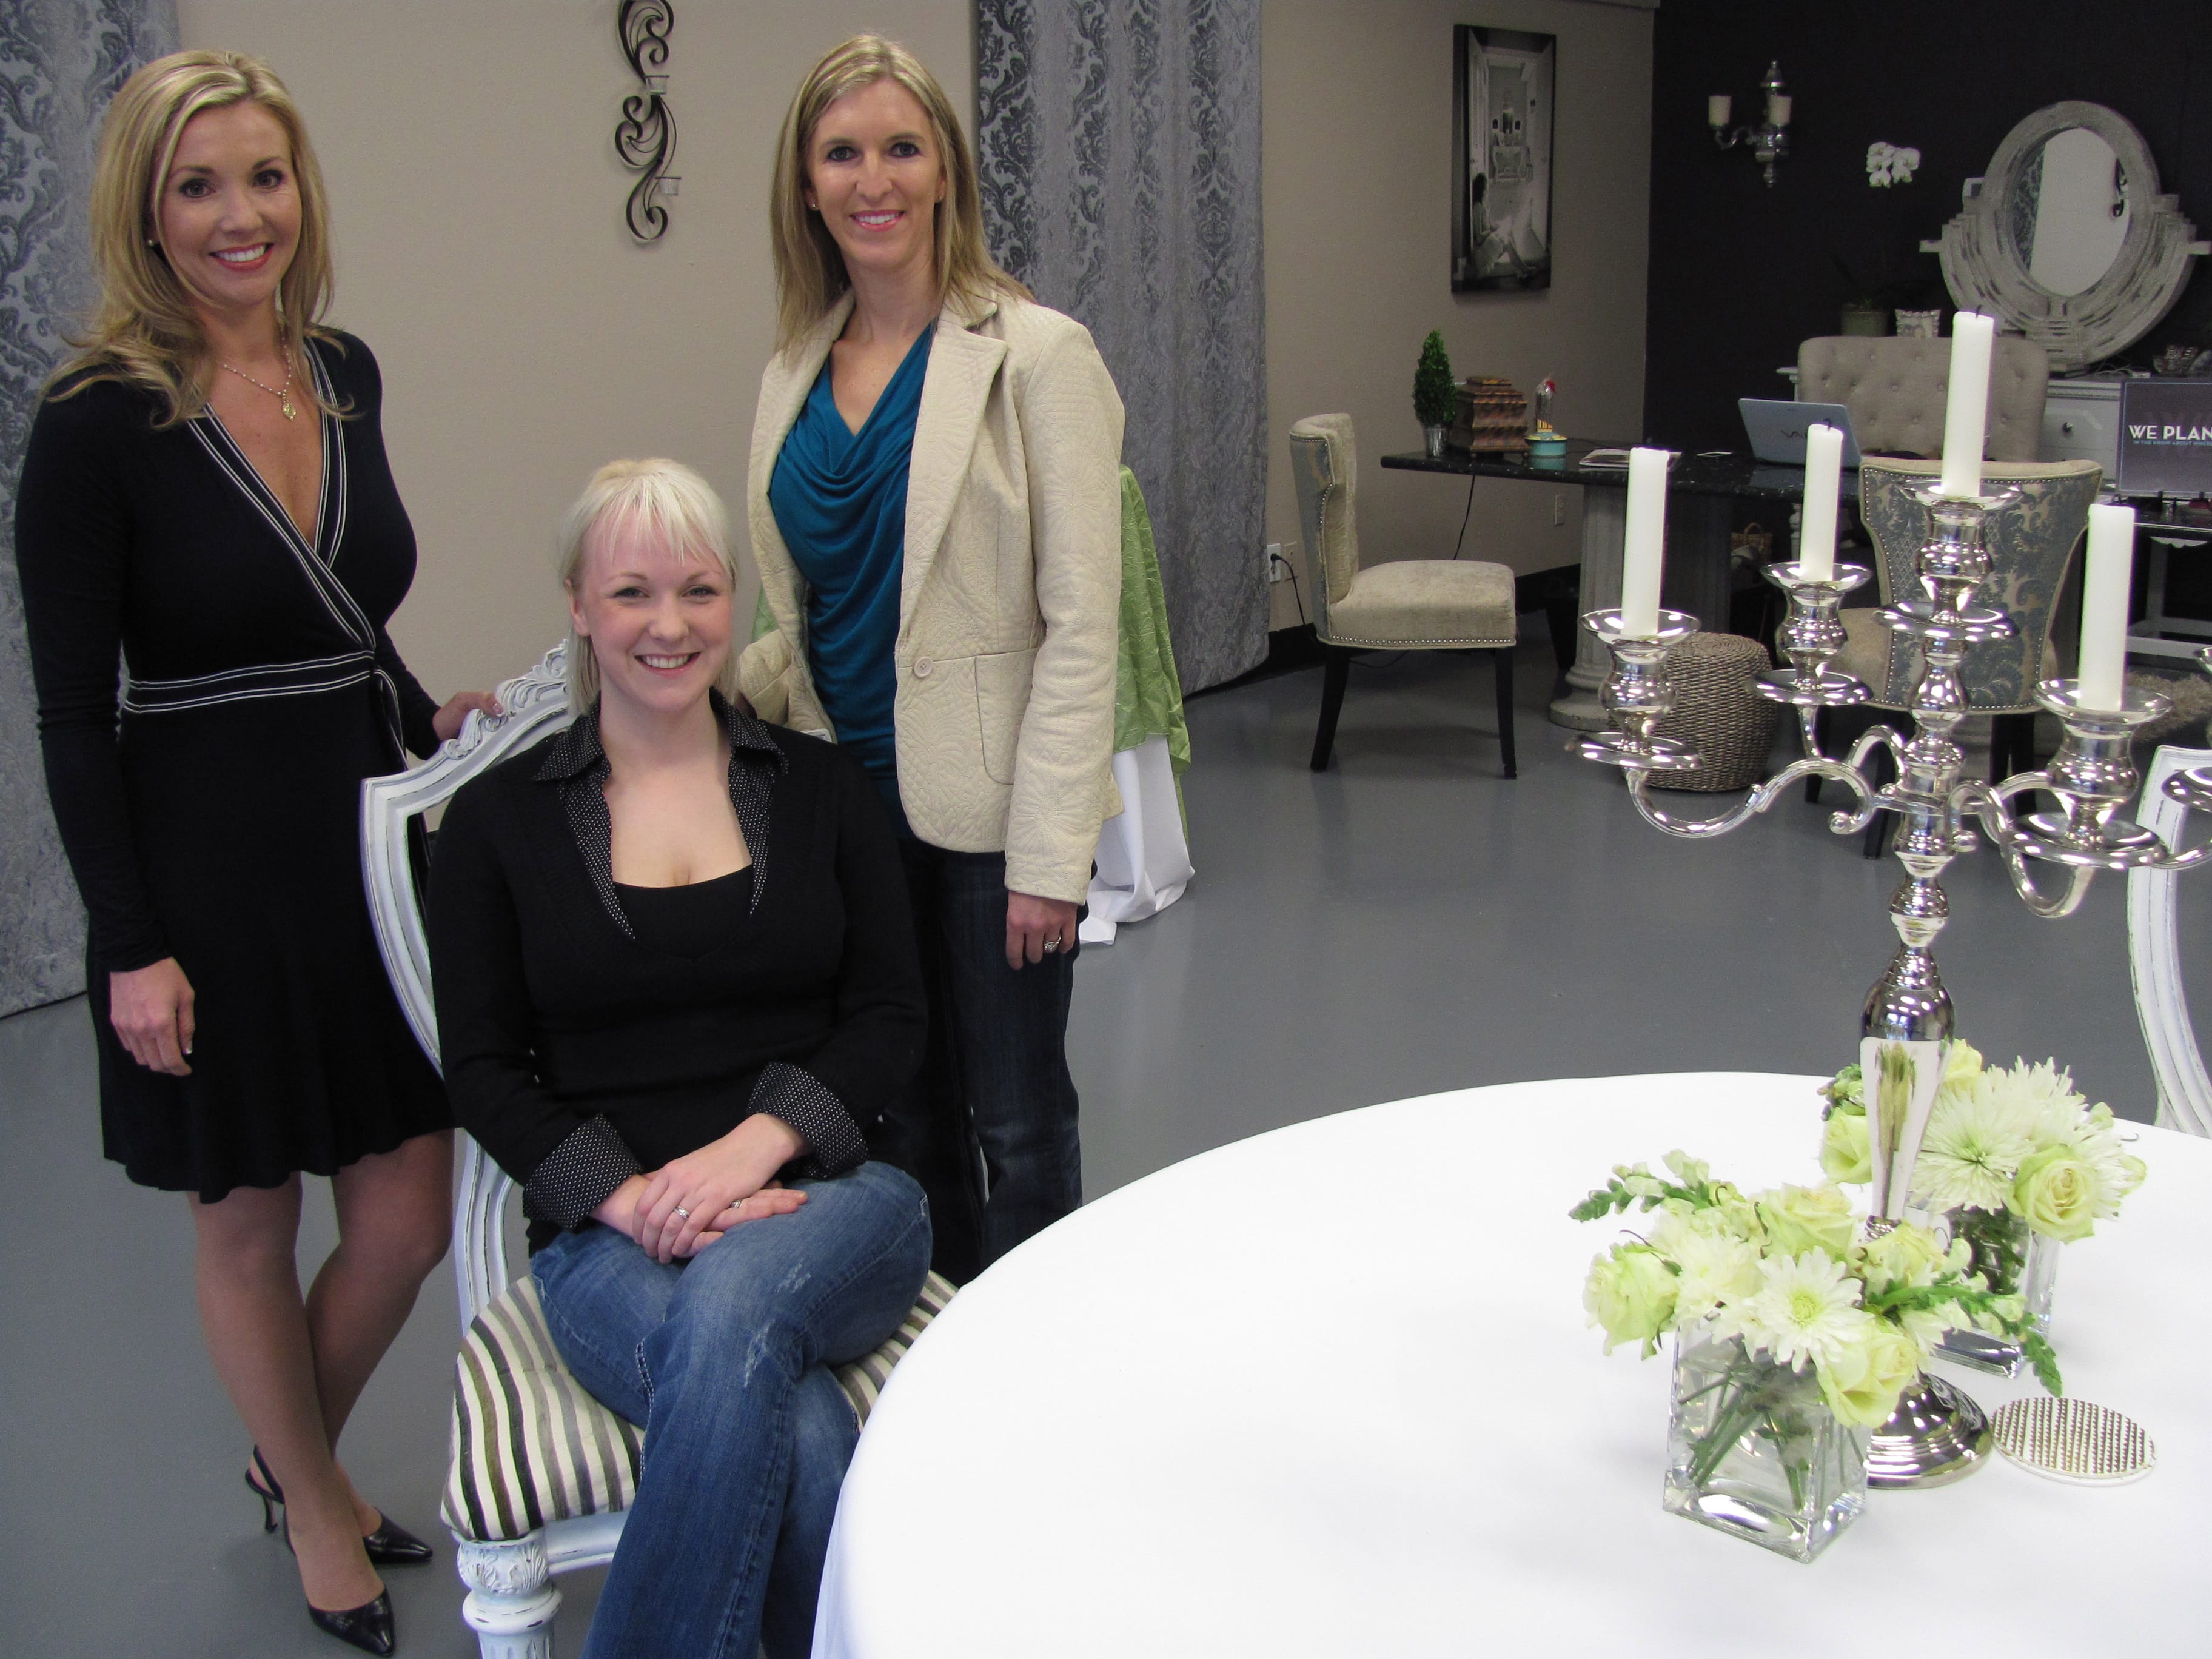 Wendy Sturm, owner of &quot;We Plan It,&quot; Kristina Kuntz, owner of Niella's Special Events, and Amy Brown, owner of Lacamas Flowers &amp; Events, (left to right) have opened an office in downtown Camas. Planning events for corporations and non-profit organizations, coordinating weddings, renting banquet linens and vases and providing floral arrangements and candy buffets are among the services available.